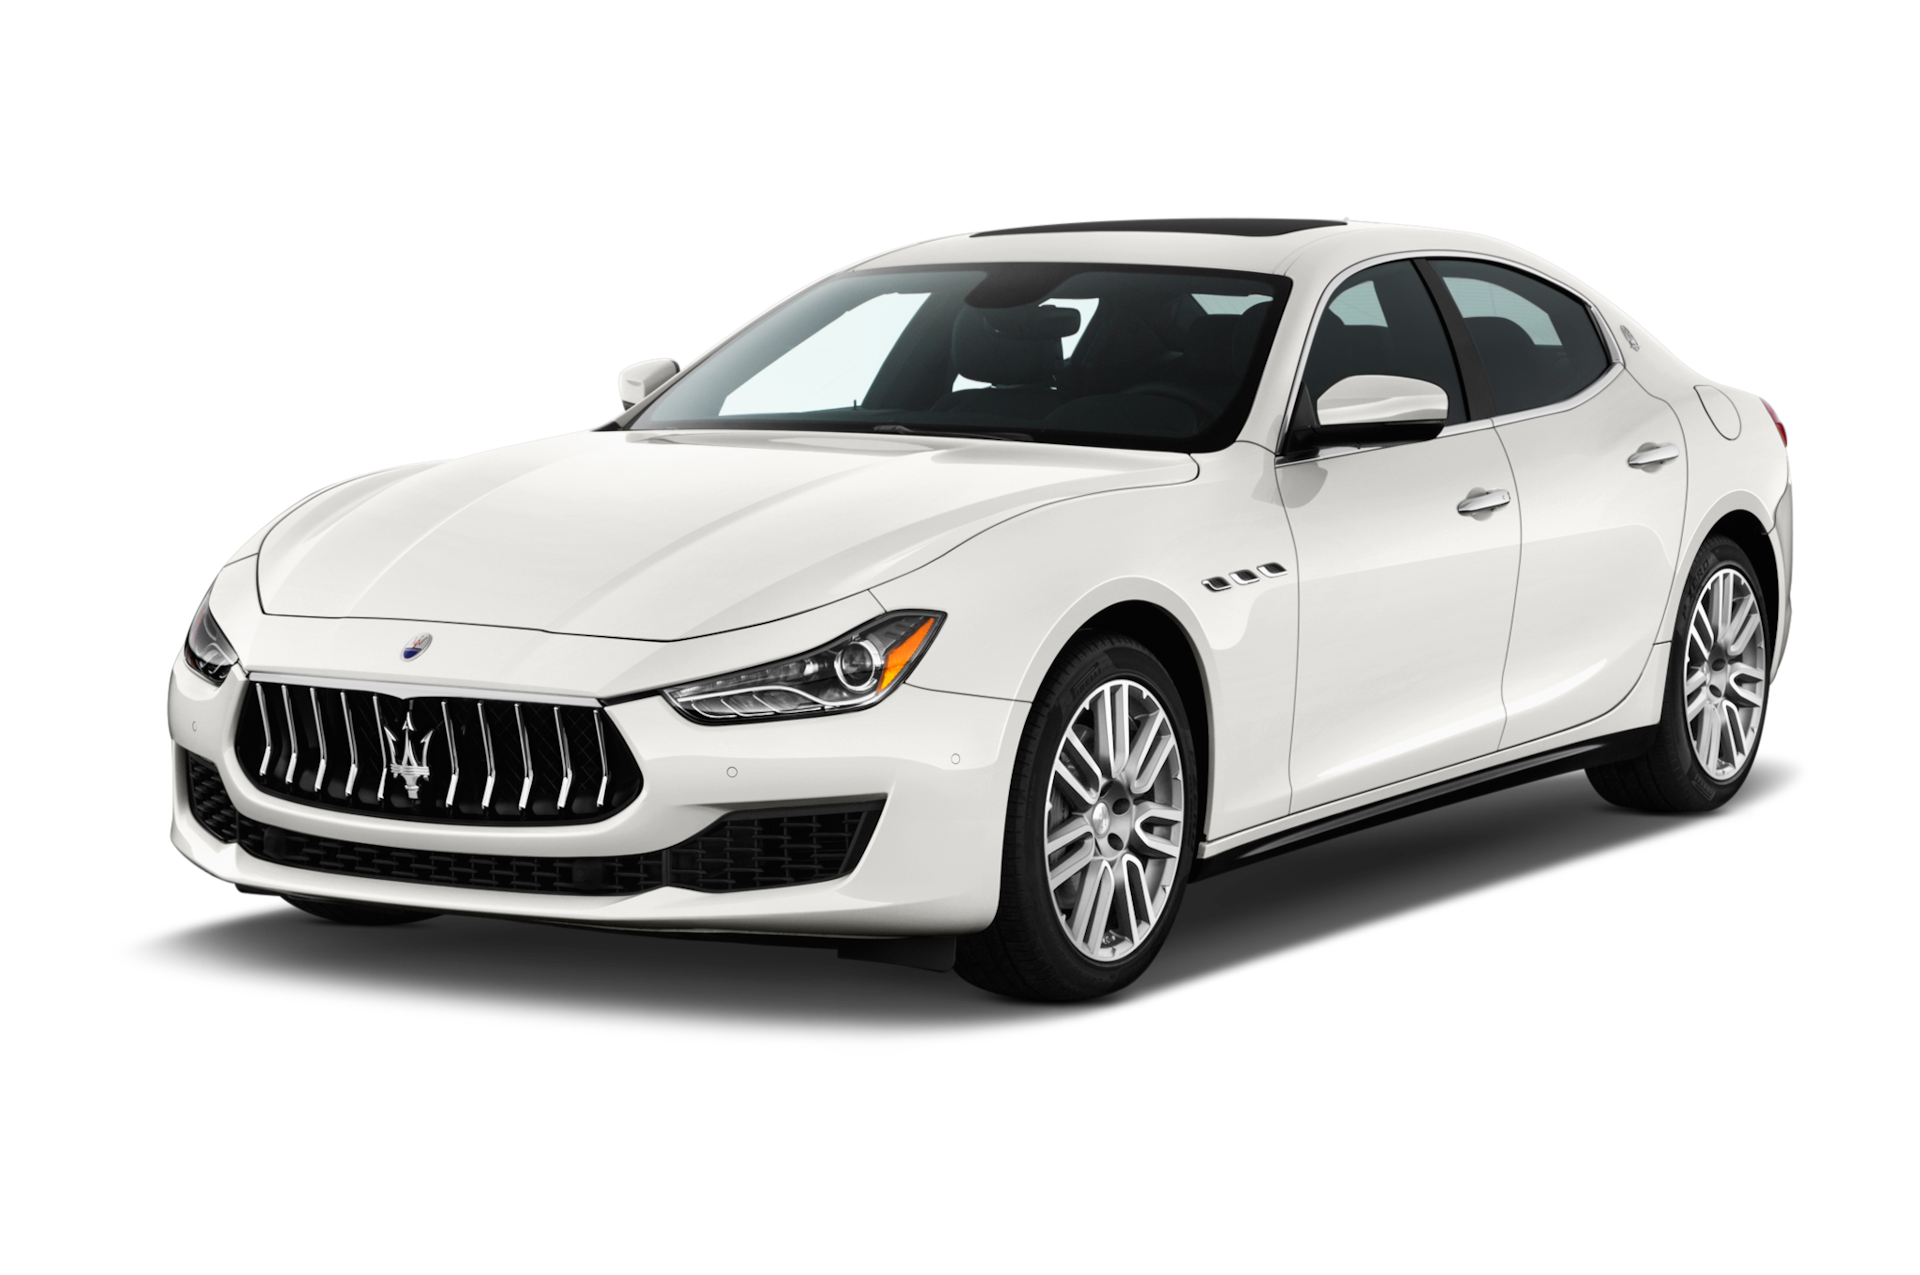 2018 Maserati Ghibli Prices, Reviews, and Photos - MotorTrend